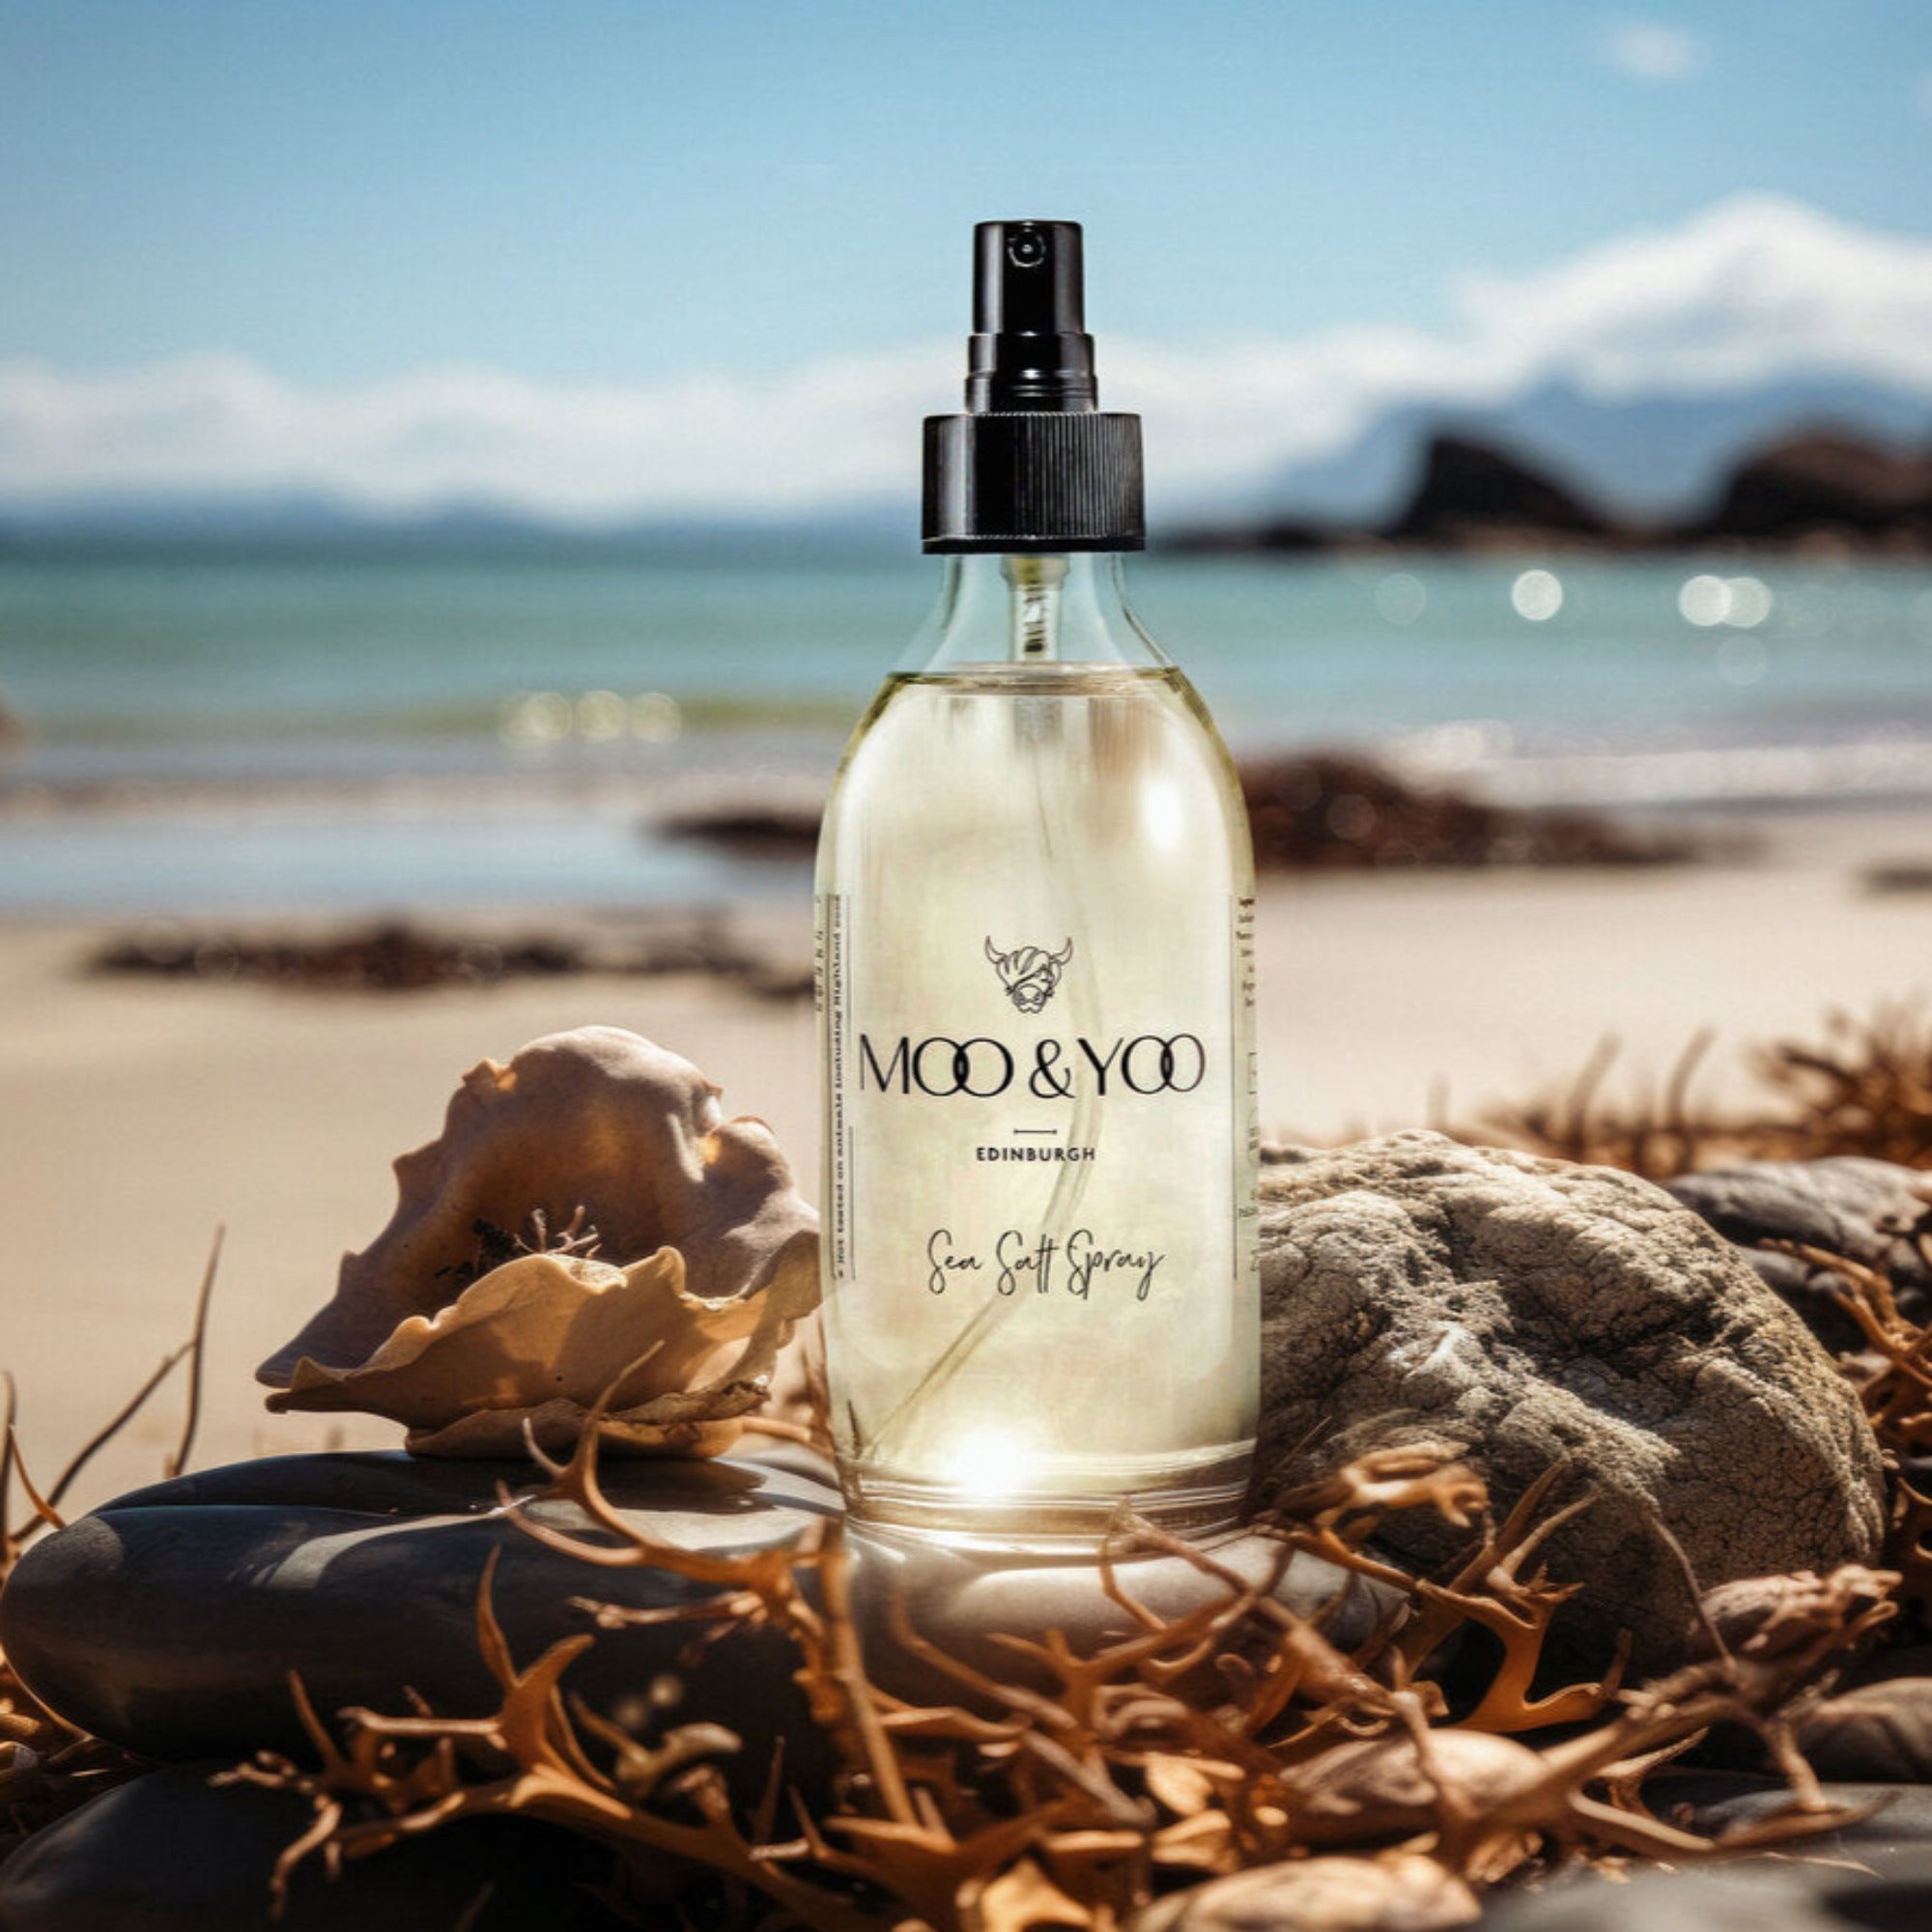 A glass bottle of Moo and Yoo Sea Salt Spray Milk sitting on rocks with some dried seaweed overlooking the  beach and sea.